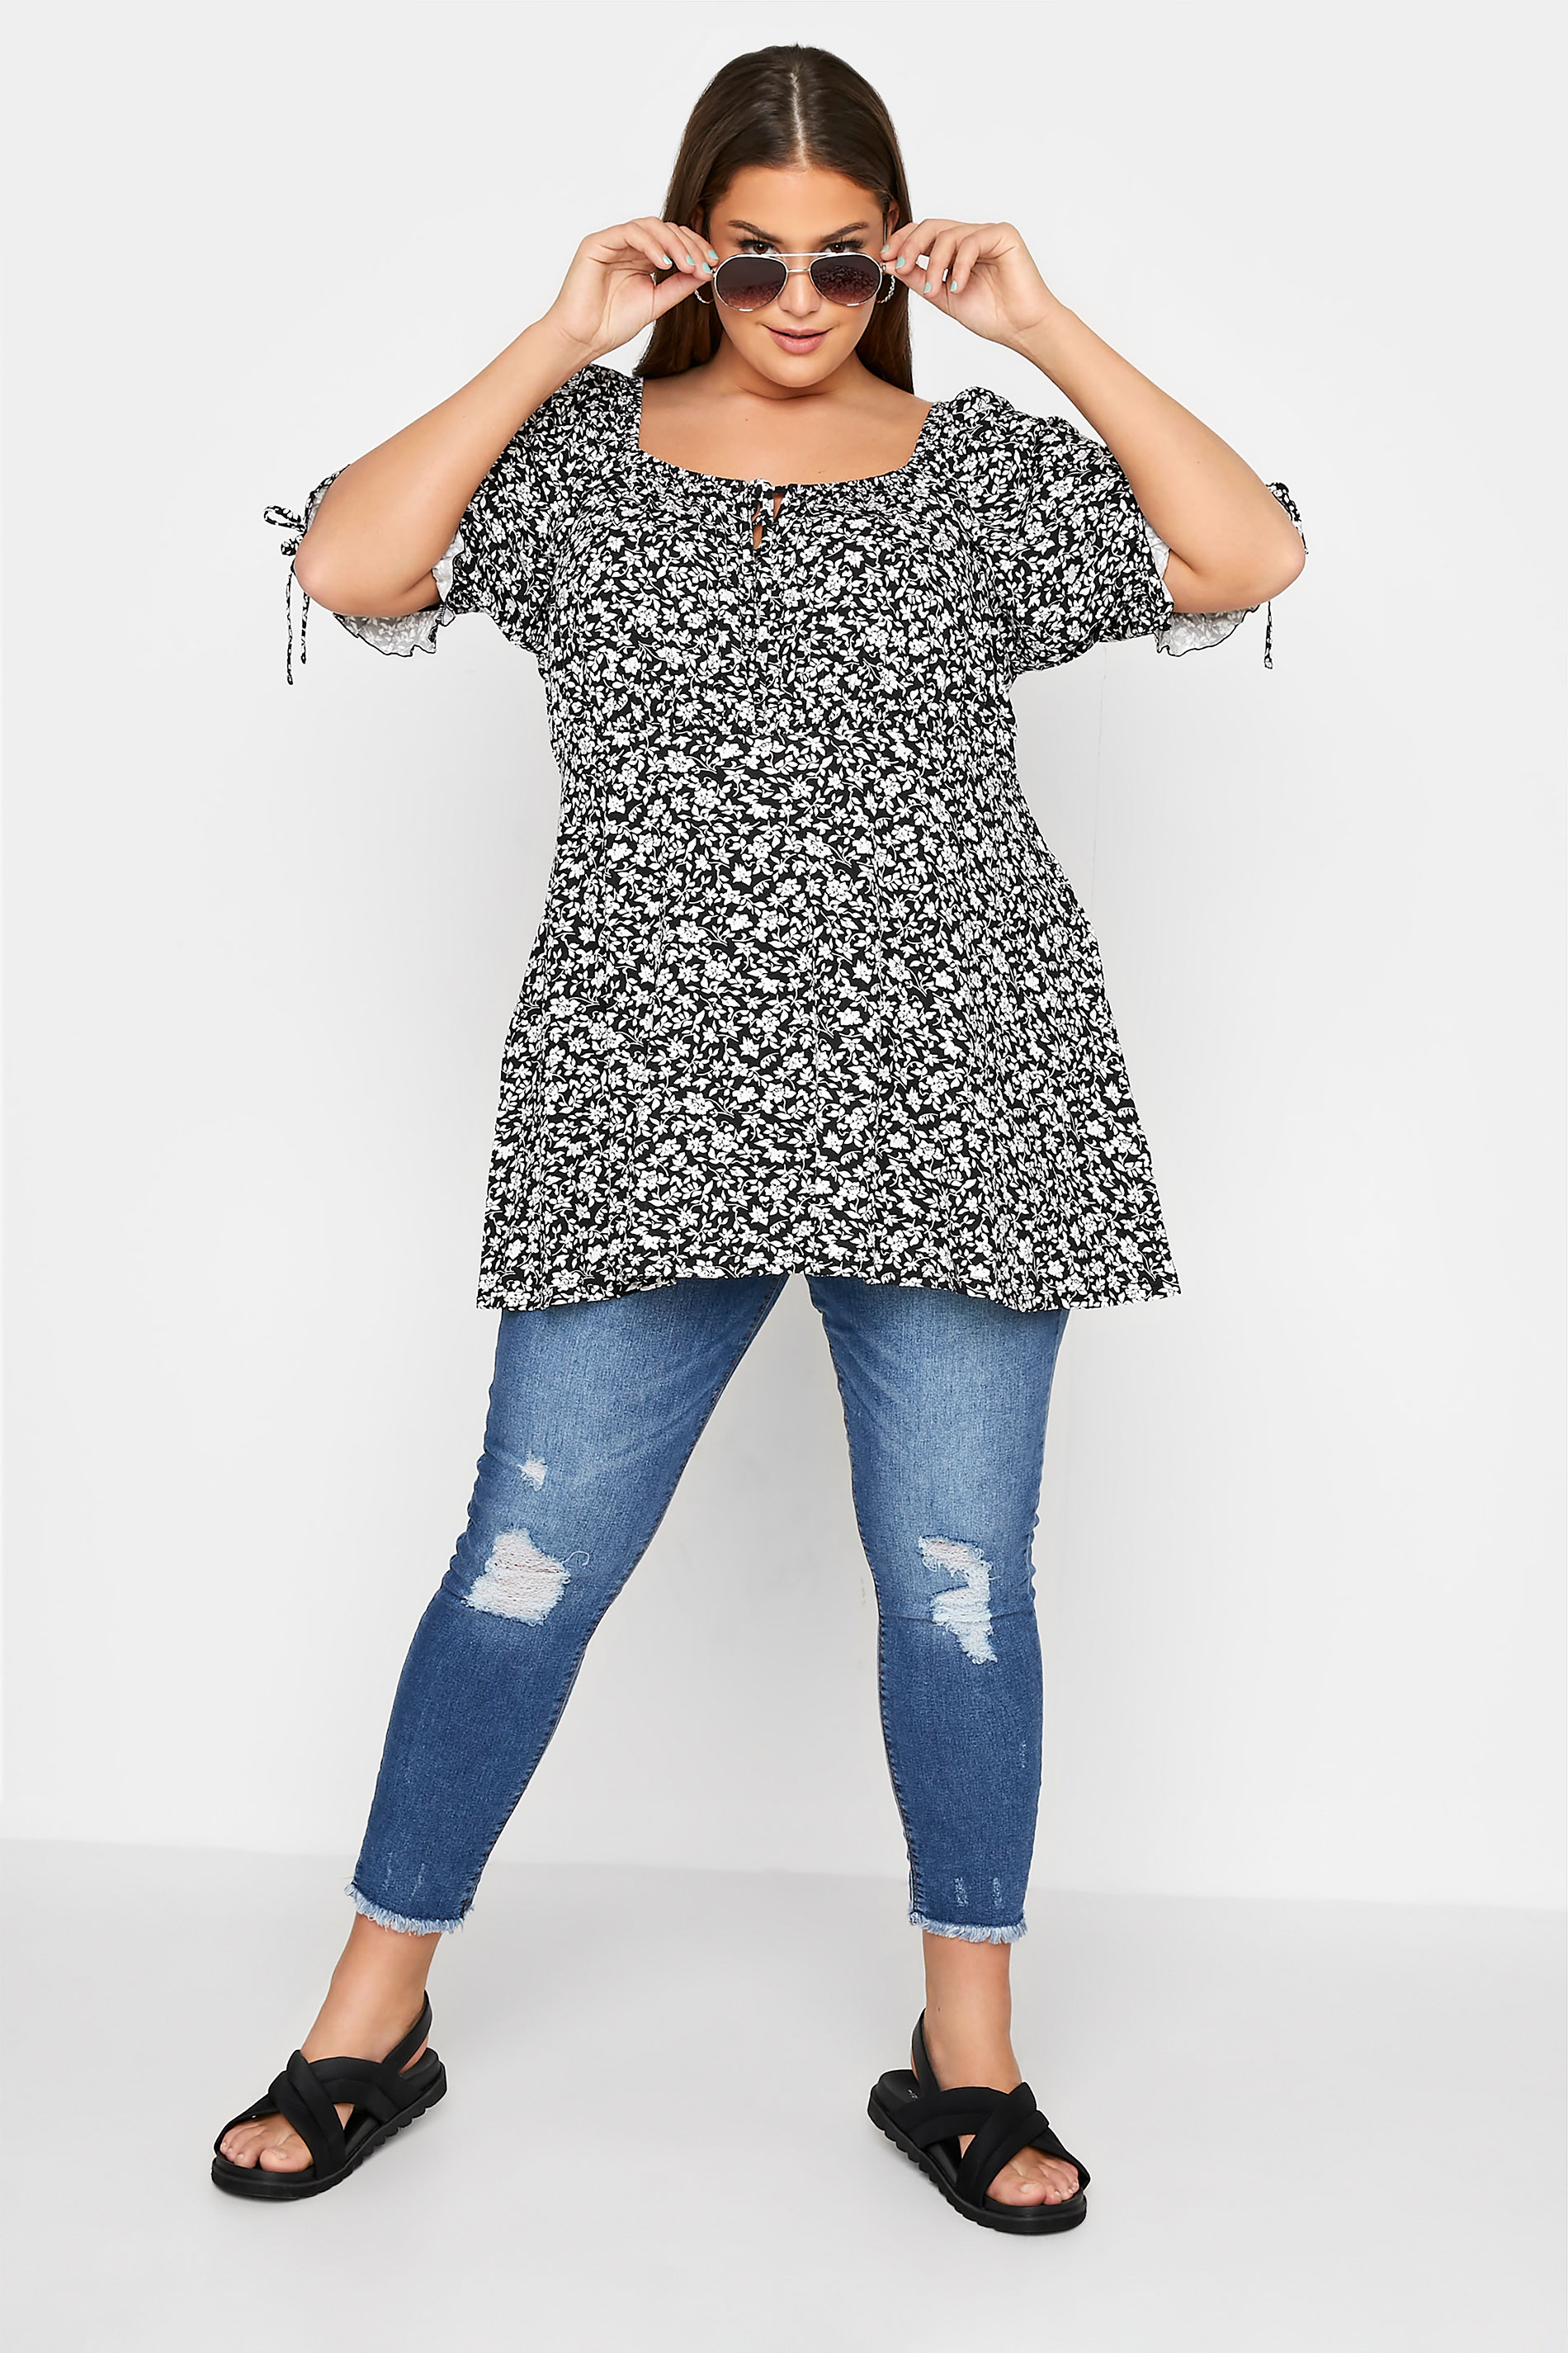 Grande taille  Tops Grande taille  Tops Jersey | LIMITED COLLECTION - Top Noir & Blanc Petites Fleurs Milkmaid - GG08746